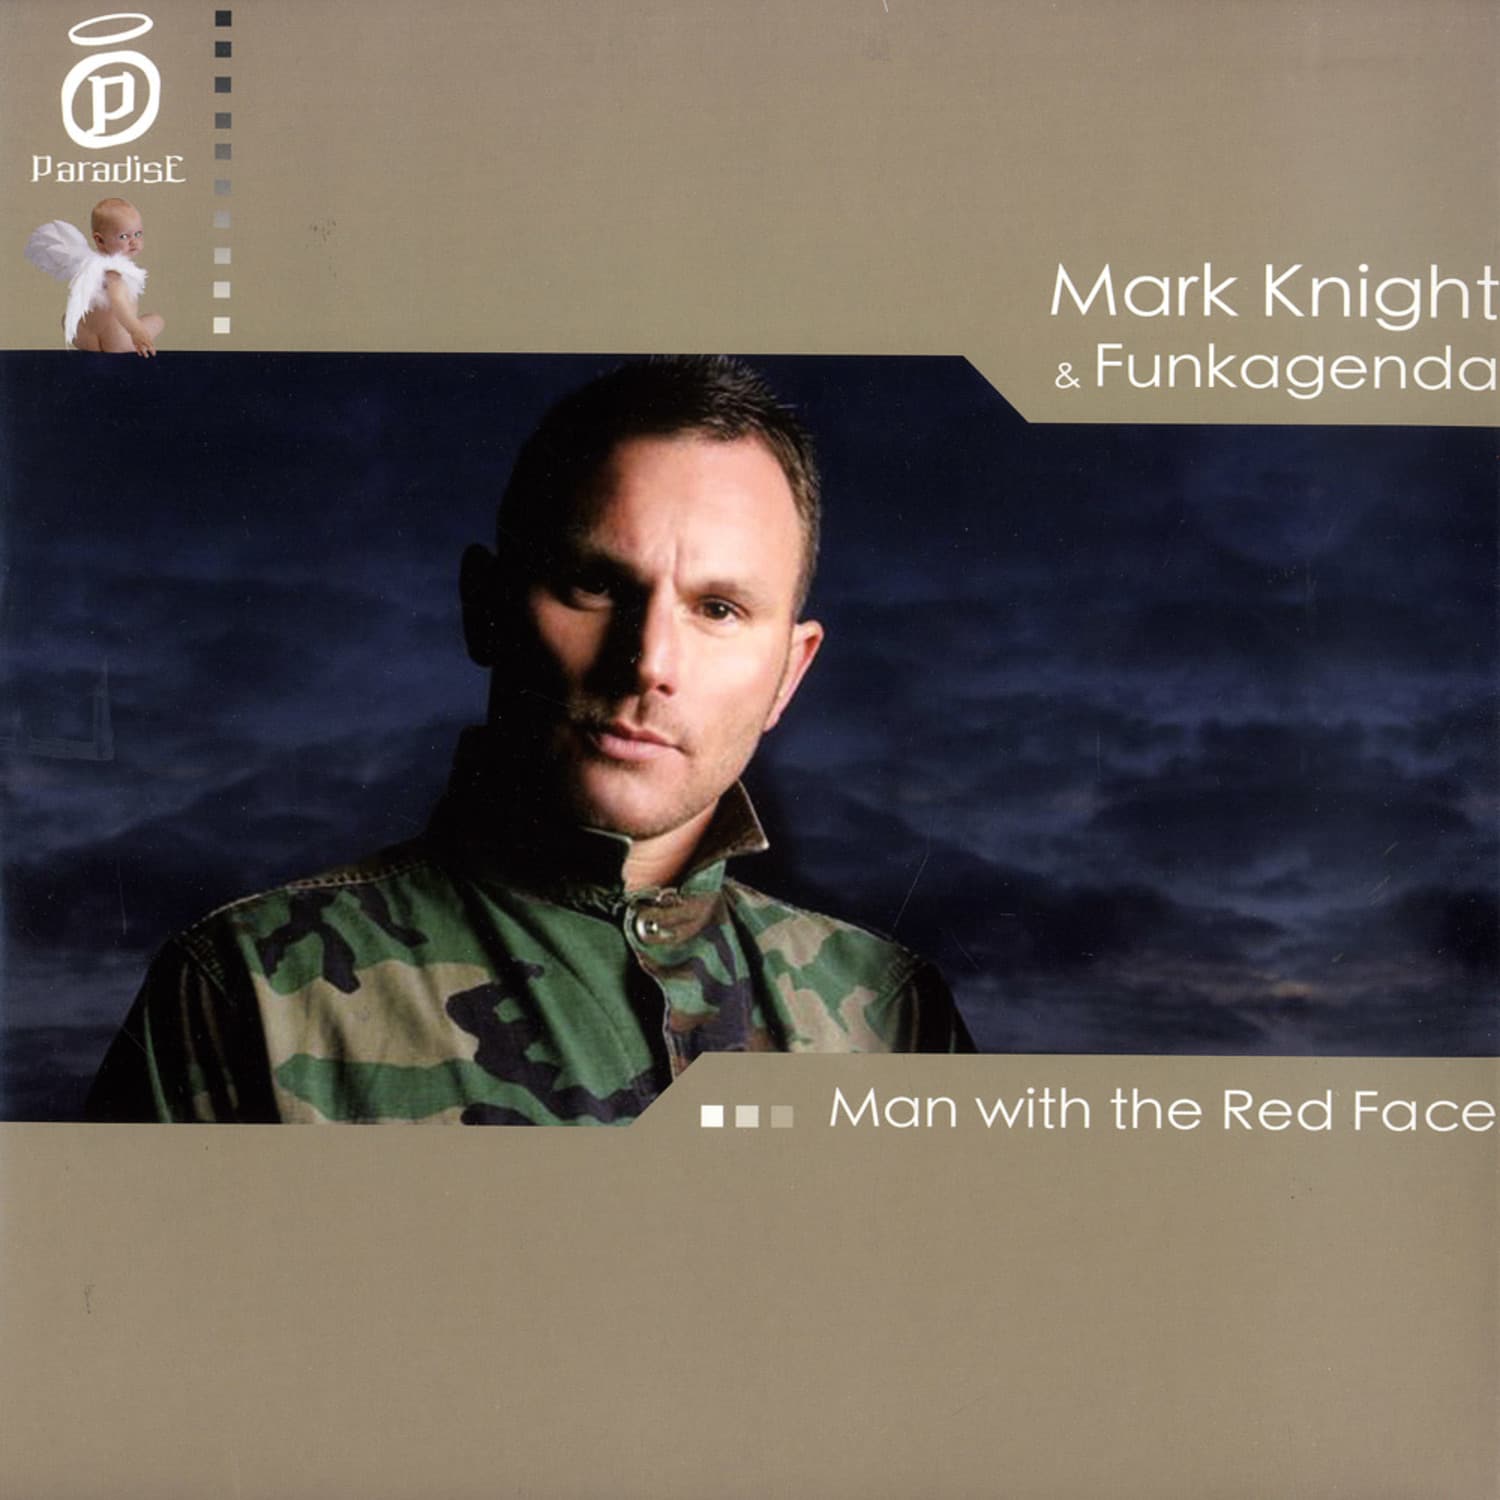 Mark Knight & Funkagenda - MAN WITH THE RED FACE